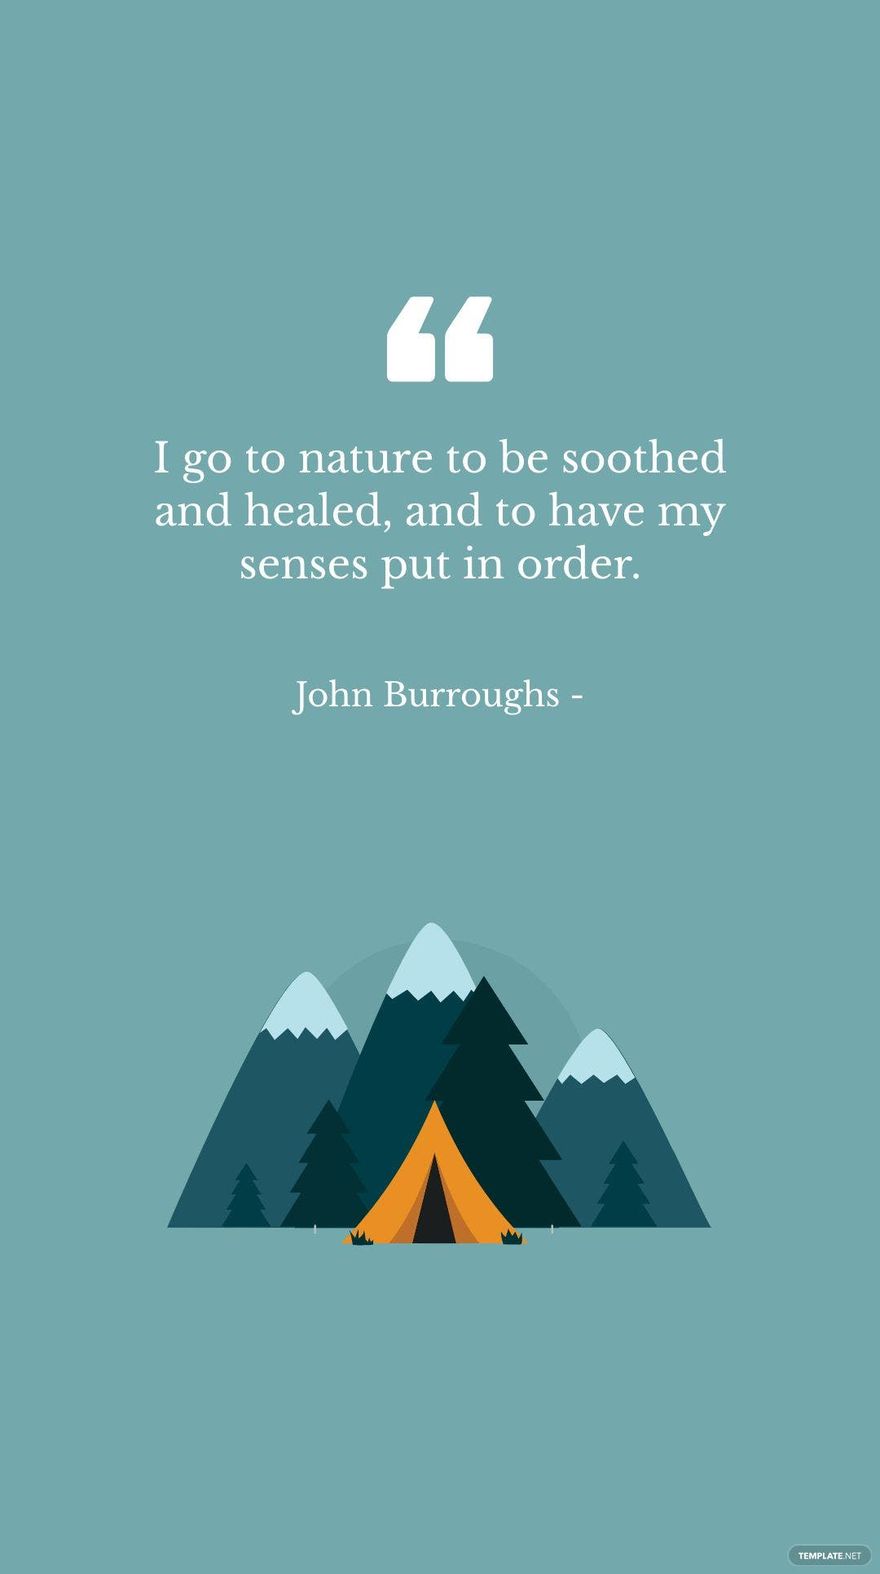 Free John Burroughs - I go to nature to be soothed and healed, and to have my senses put in order. in JPG